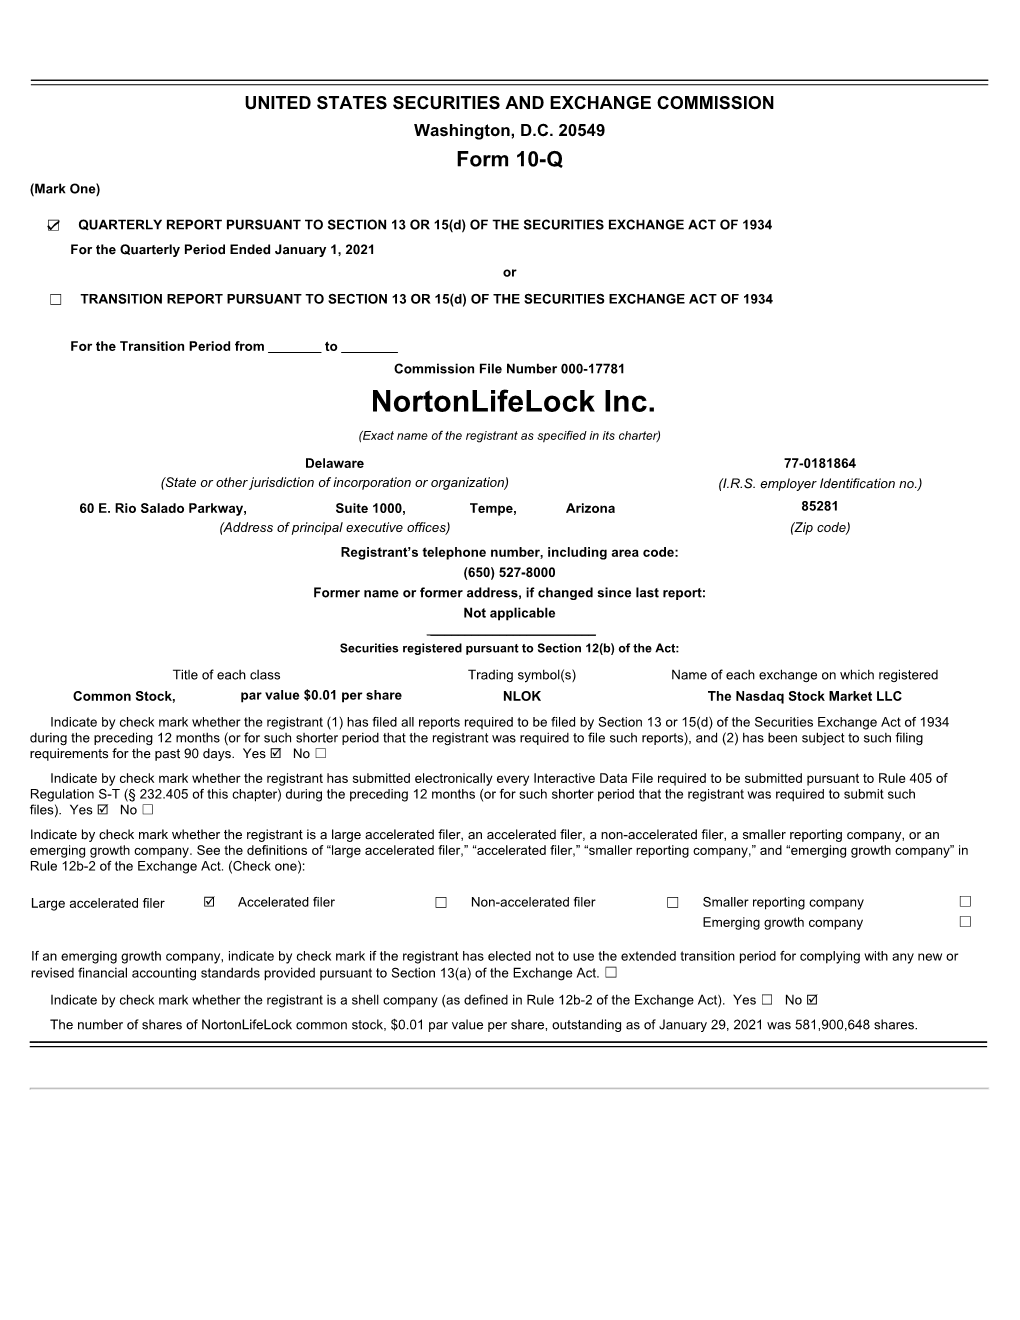 Nortonlifelock Inc. (Exact Name of the Registrant As Specified in Its Charter)